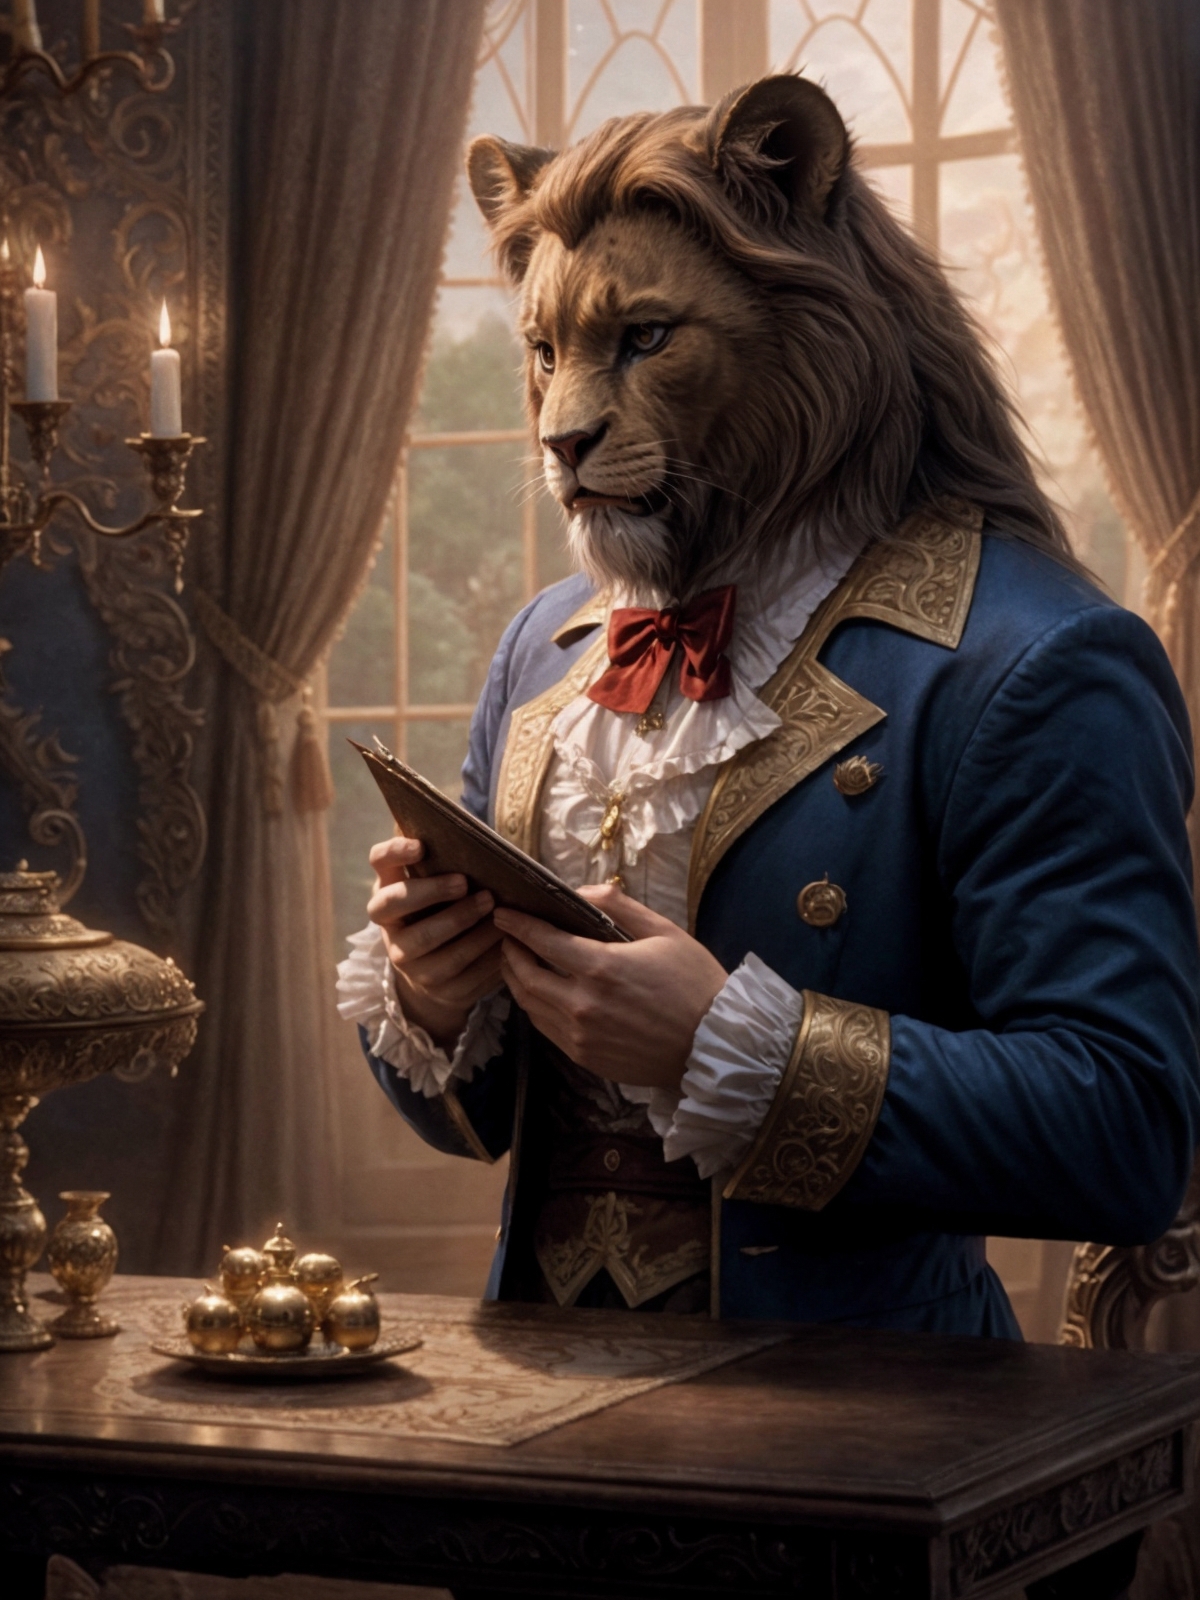 A man in a blue suit and a lion head is reading a book while sitting at a table with candles.